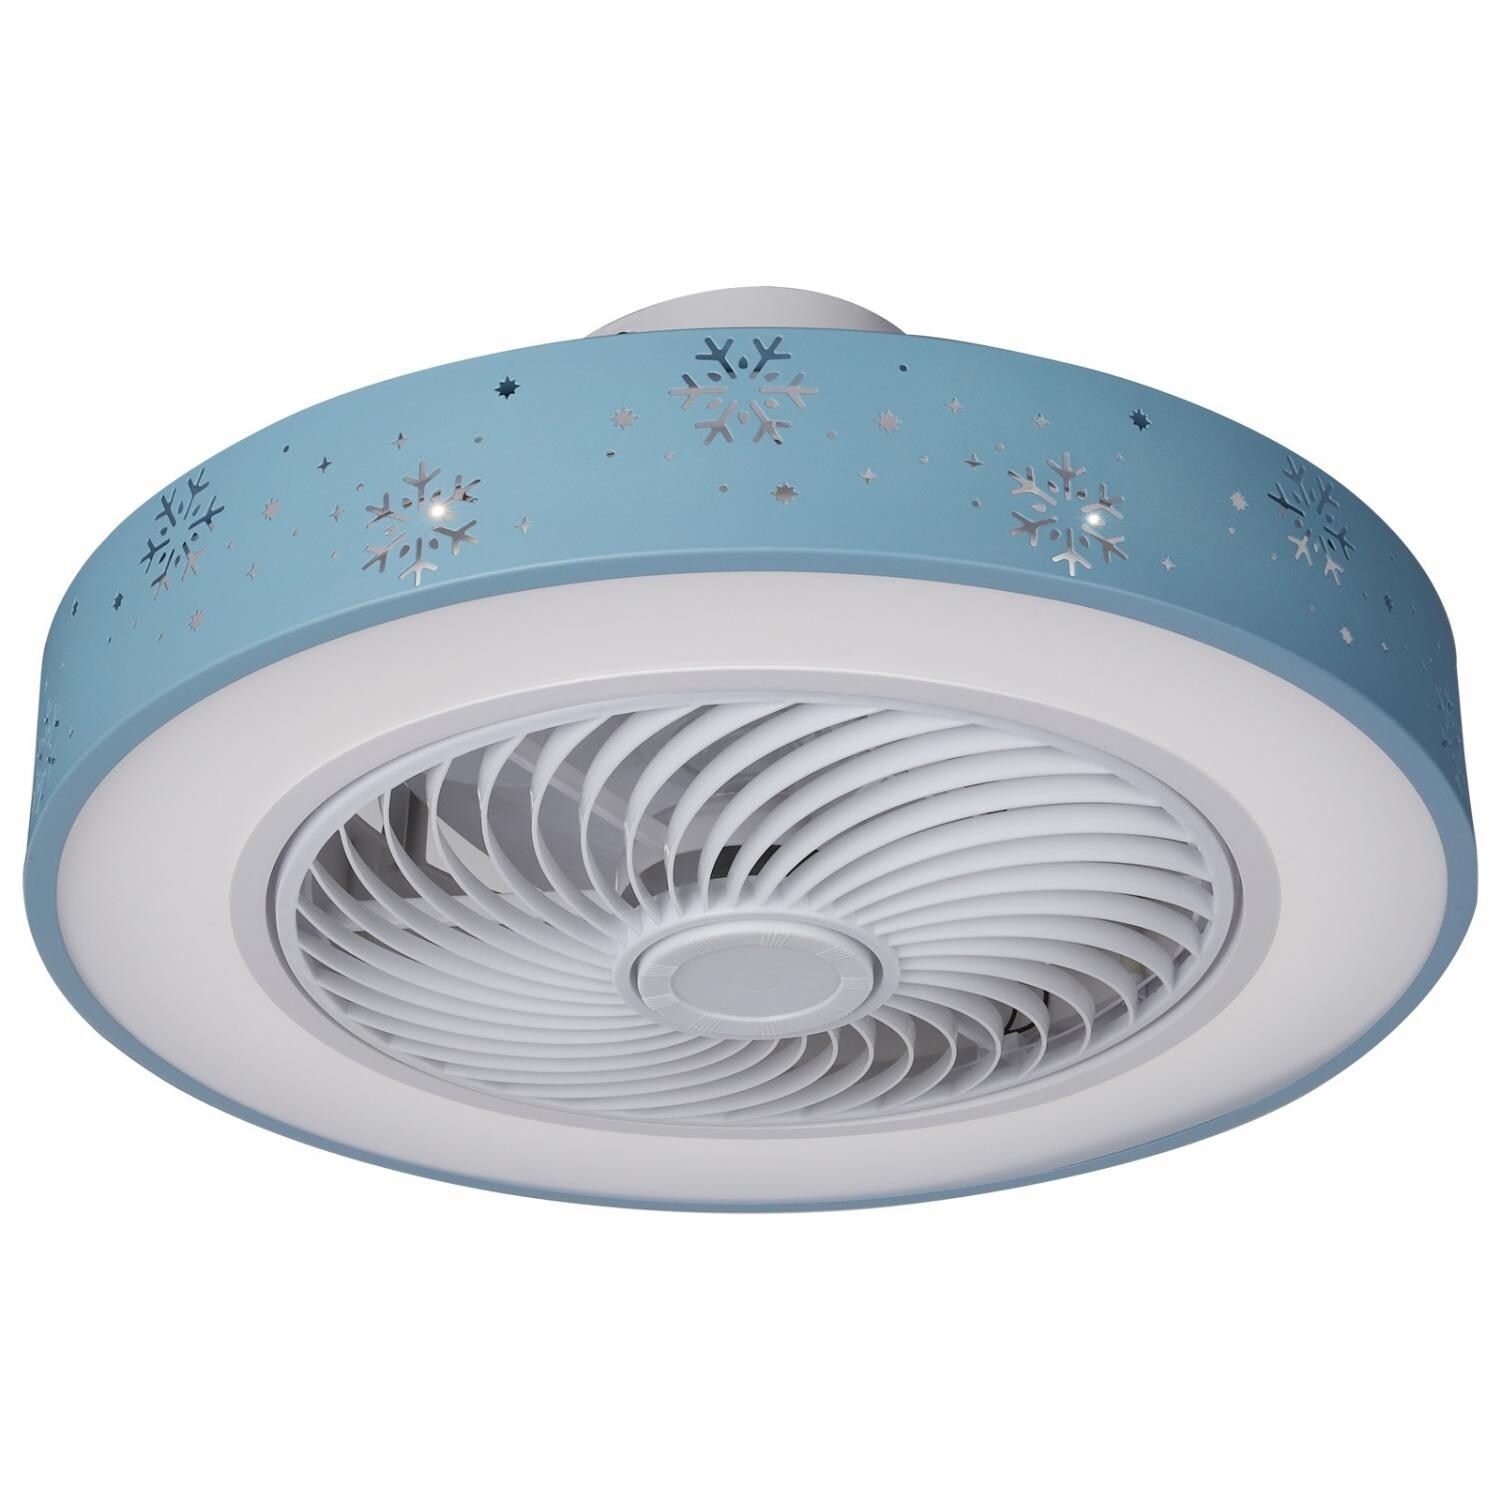 Fan LED 36W Ceiling Light,Dimmable with Remote Control,6 Colors Available,Gray 